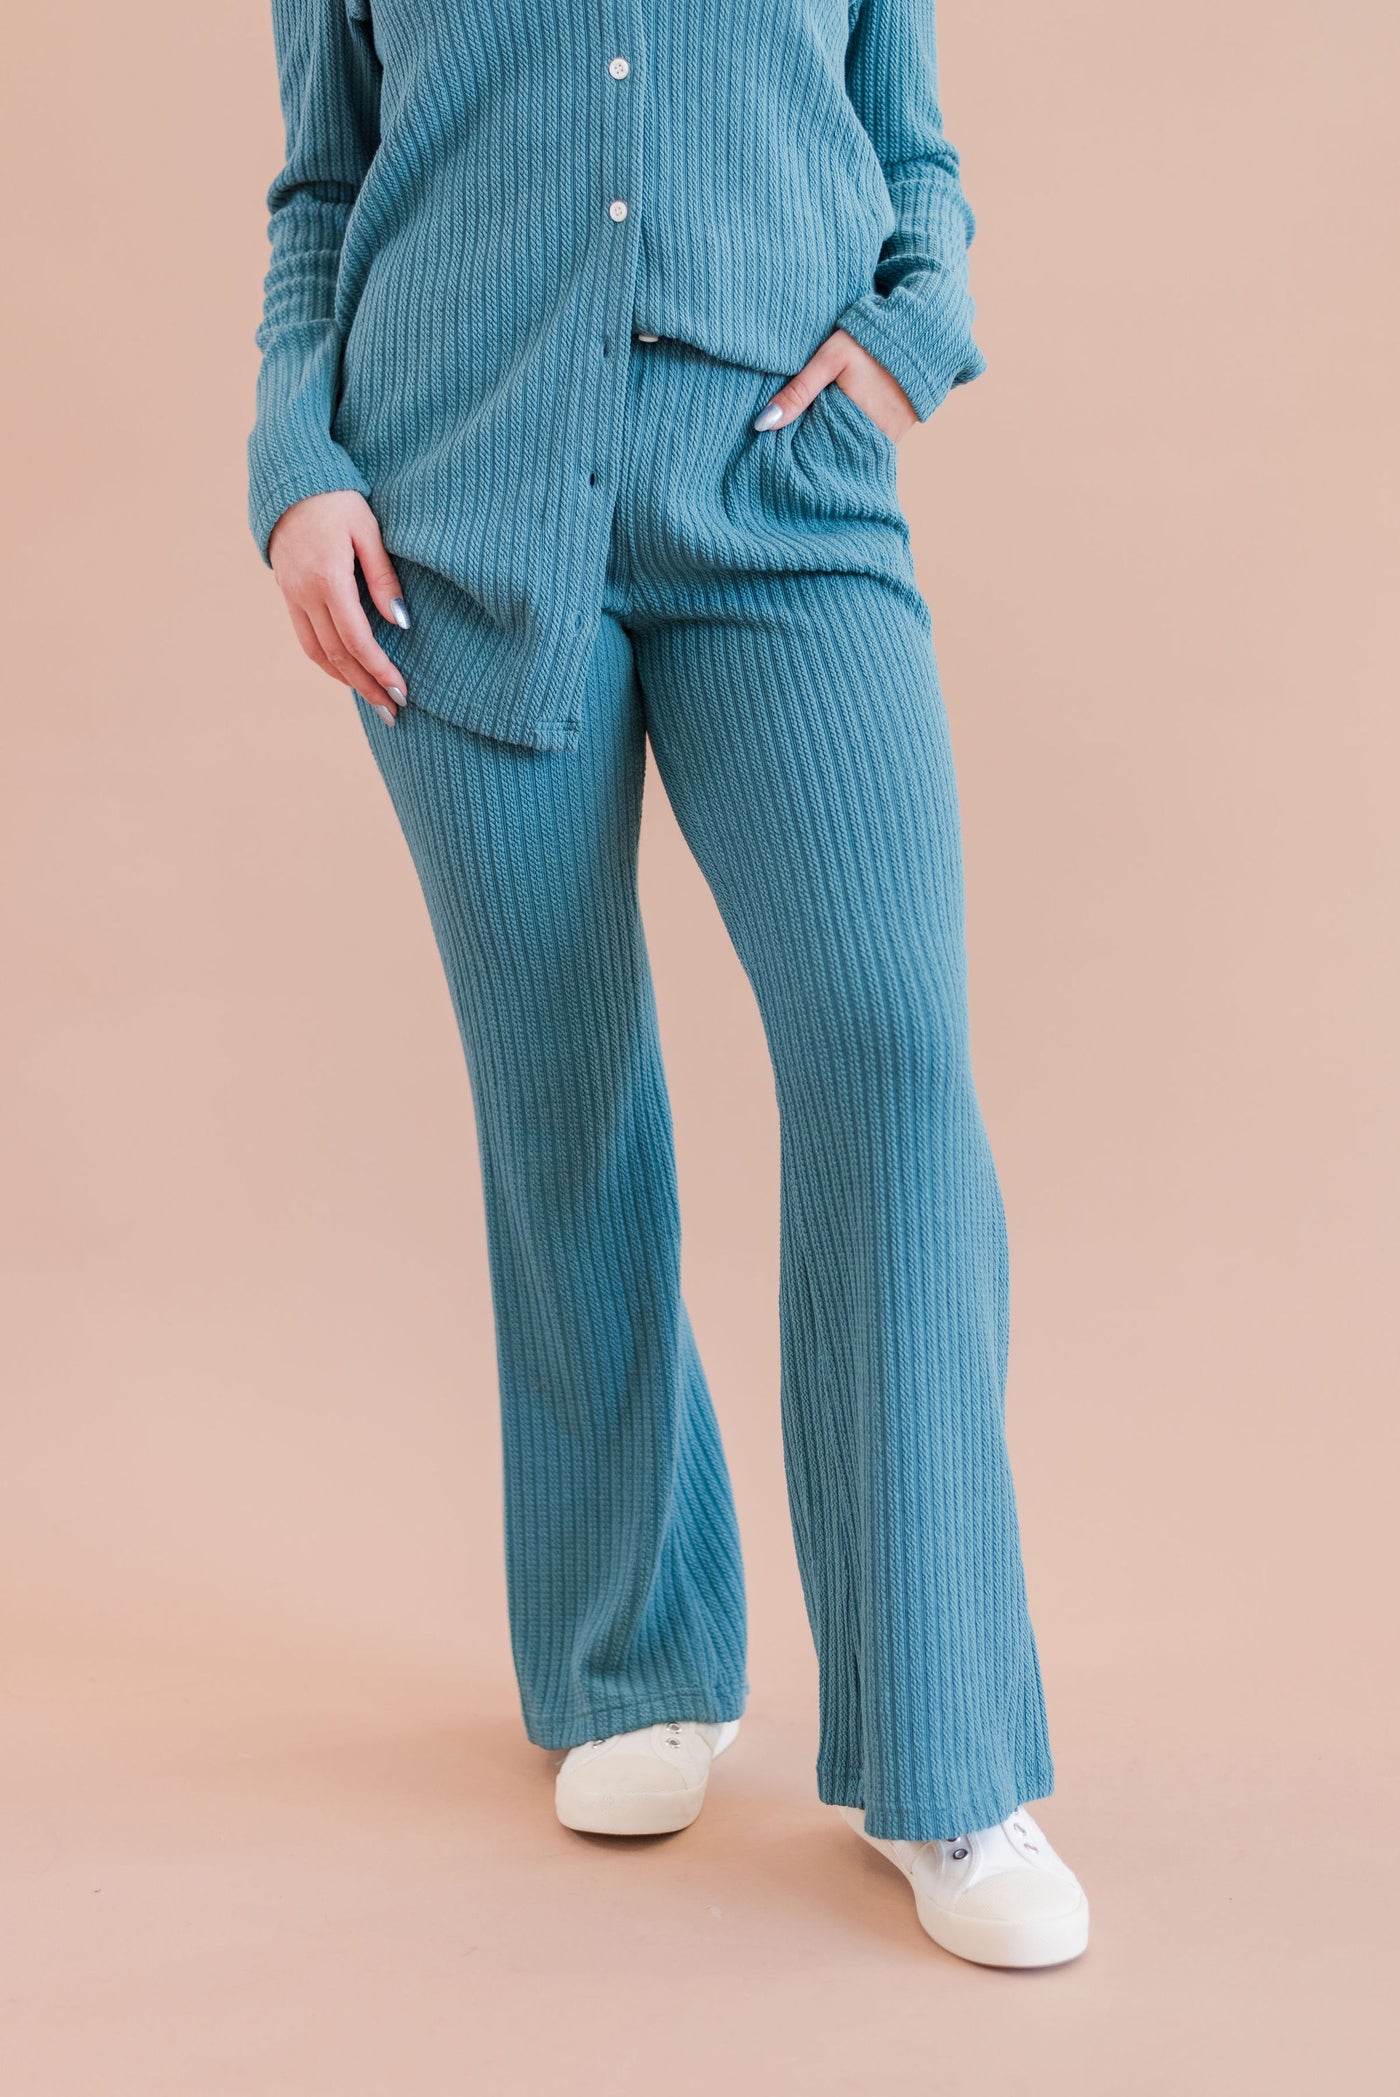 FRNCH | Perle Flared Pant - Poppy and Stella